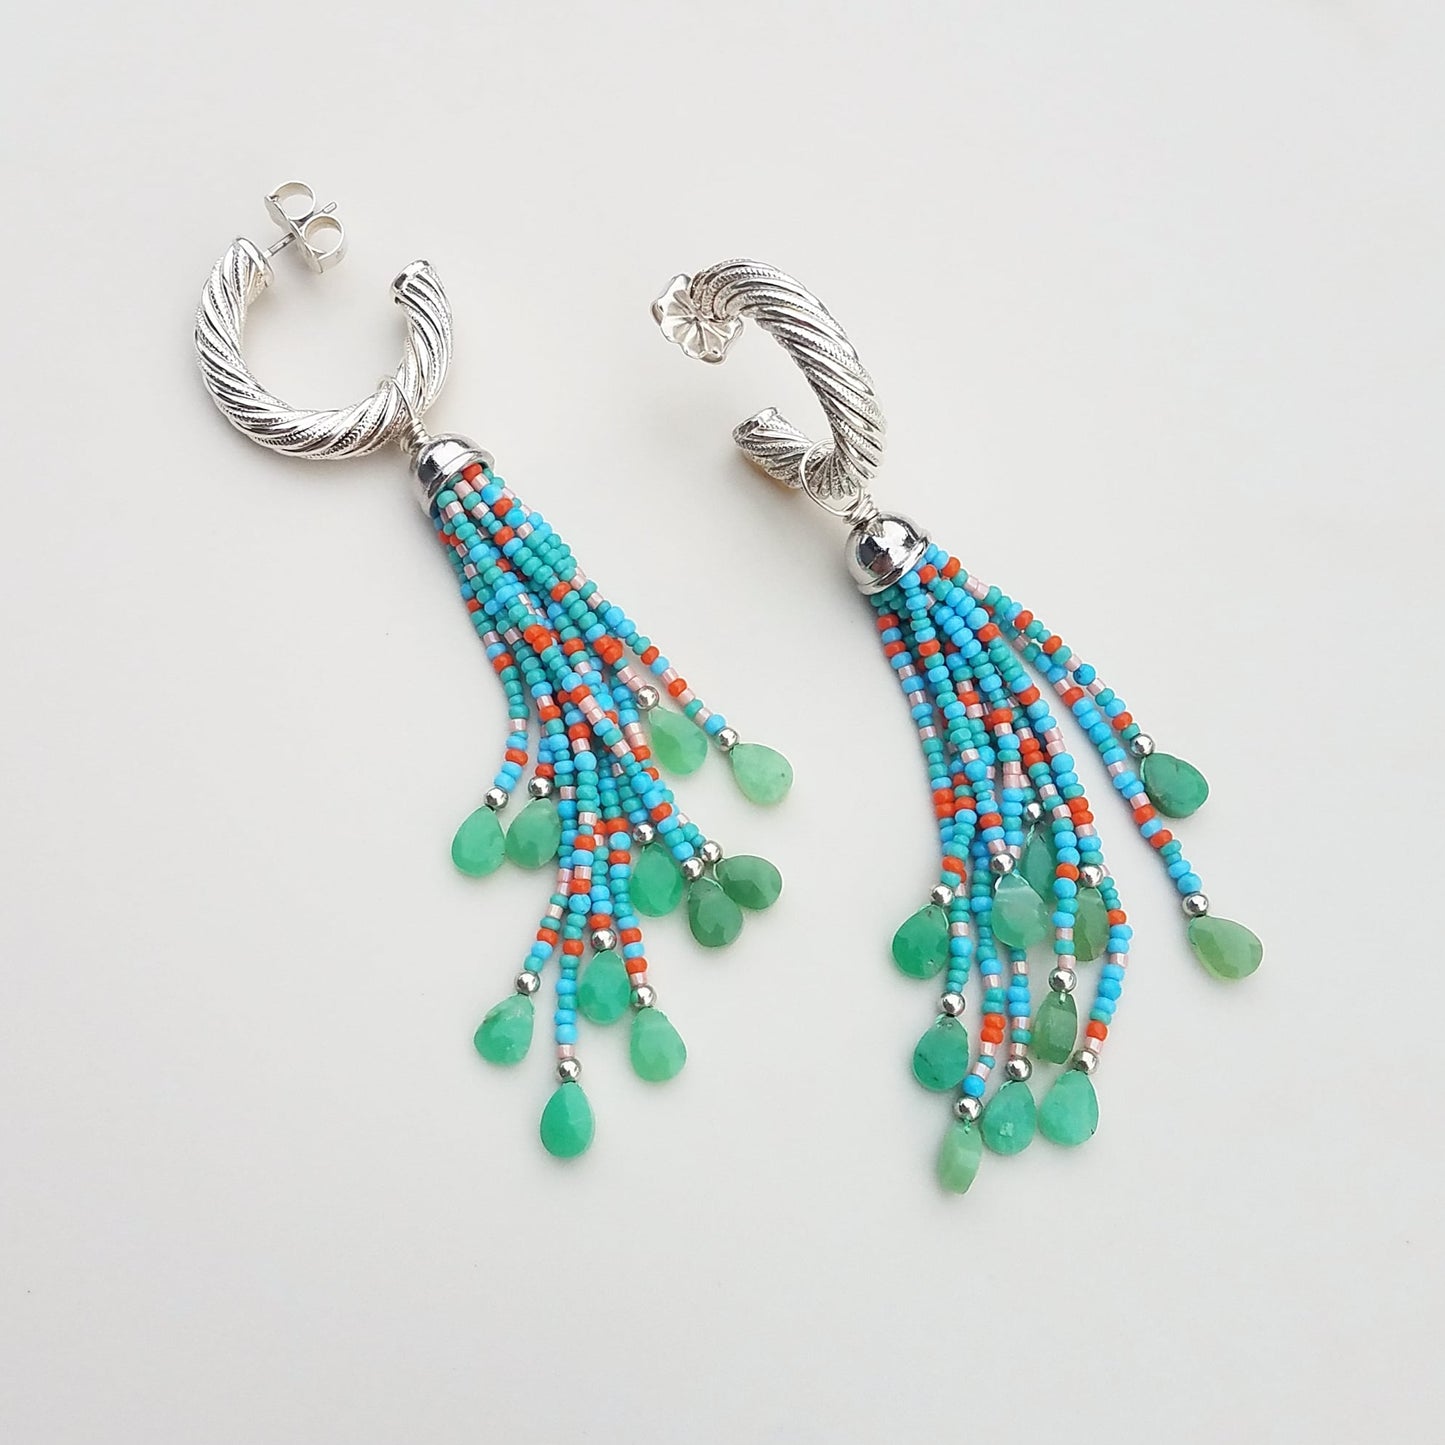 Silver Vintage Hoops with Turquoise & Chrysoprase Tassels